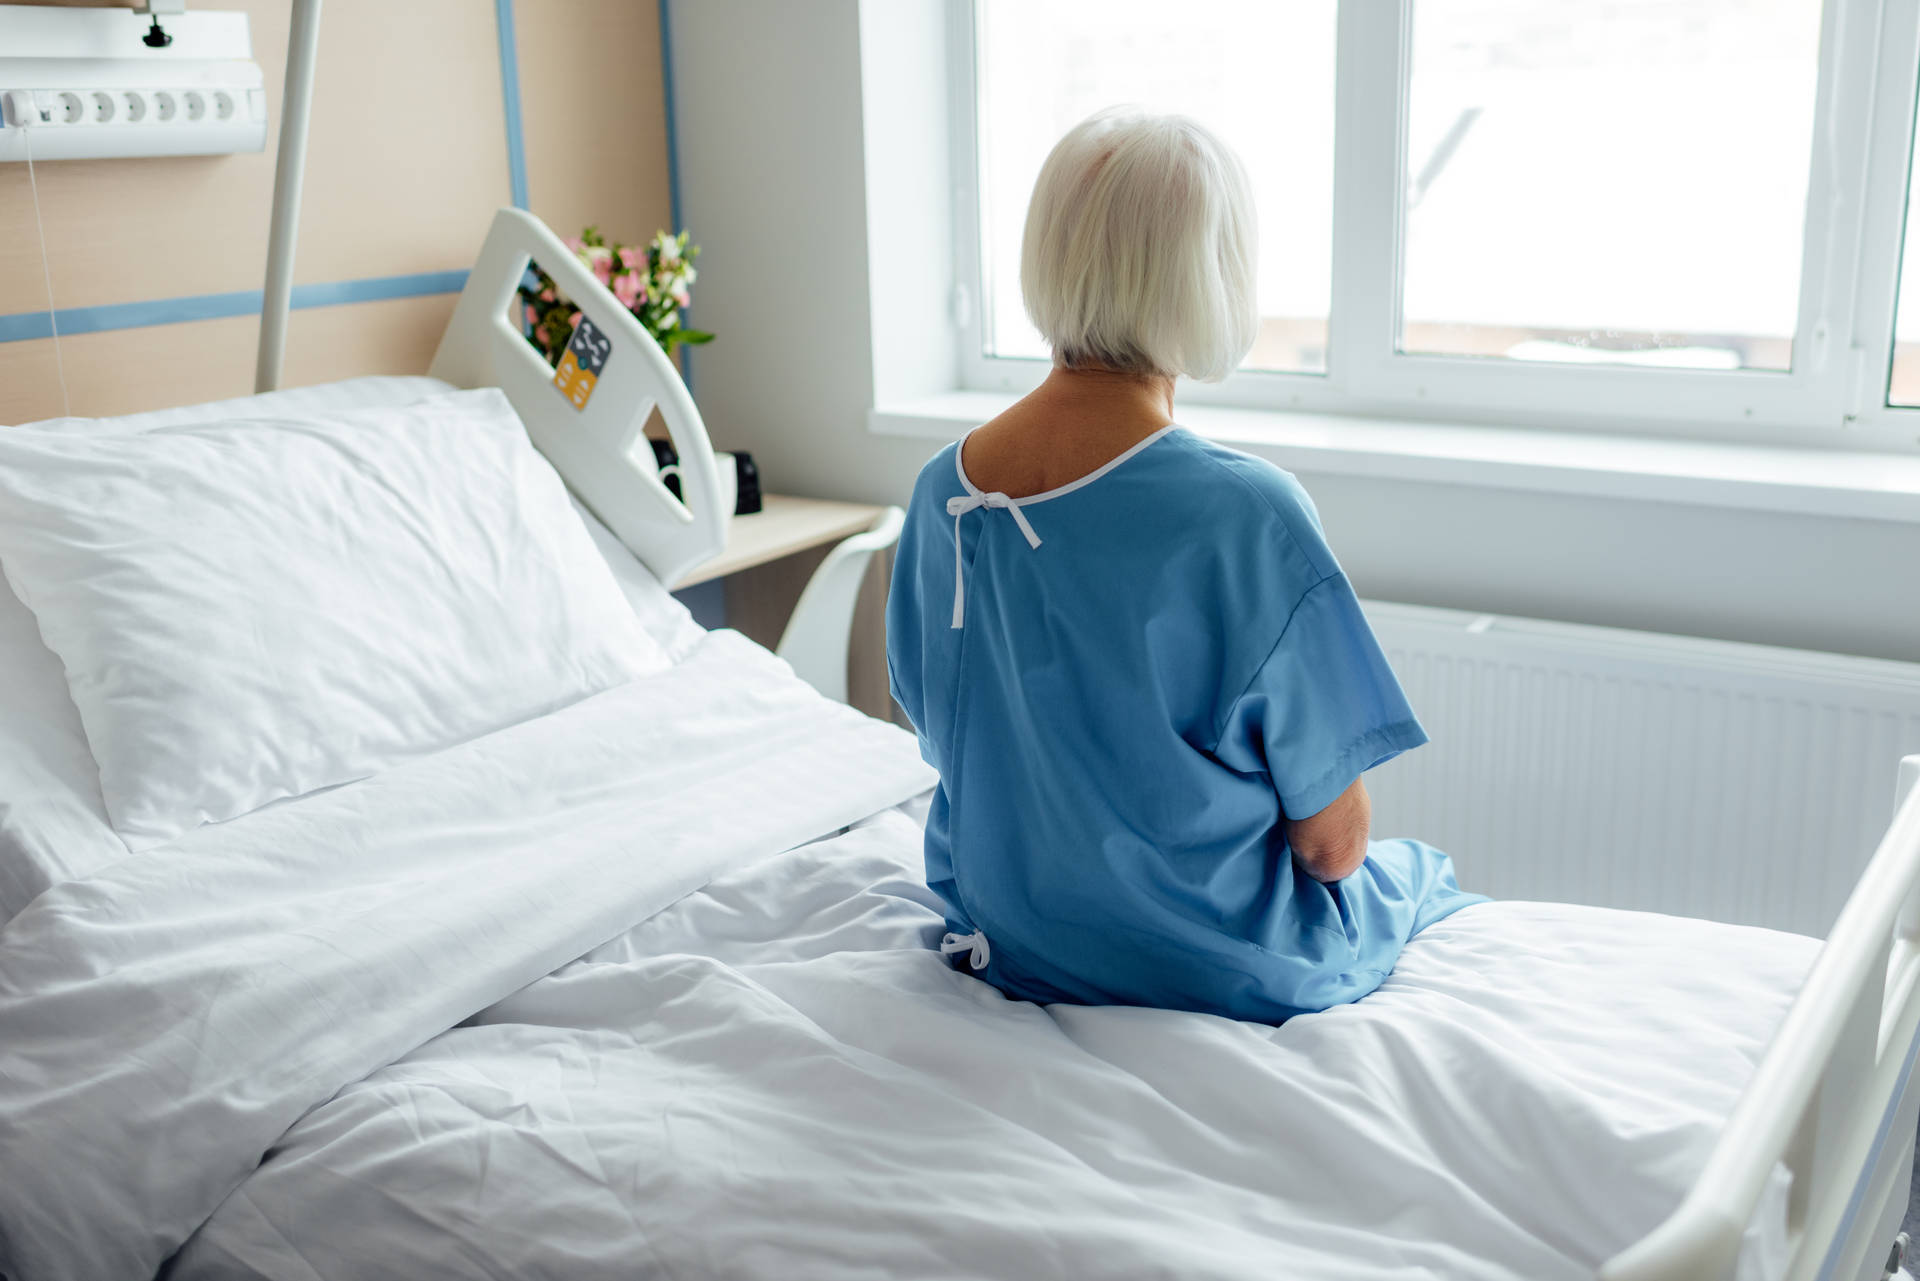 A Female Patient Resting in a Hospital Bed Wallpaper